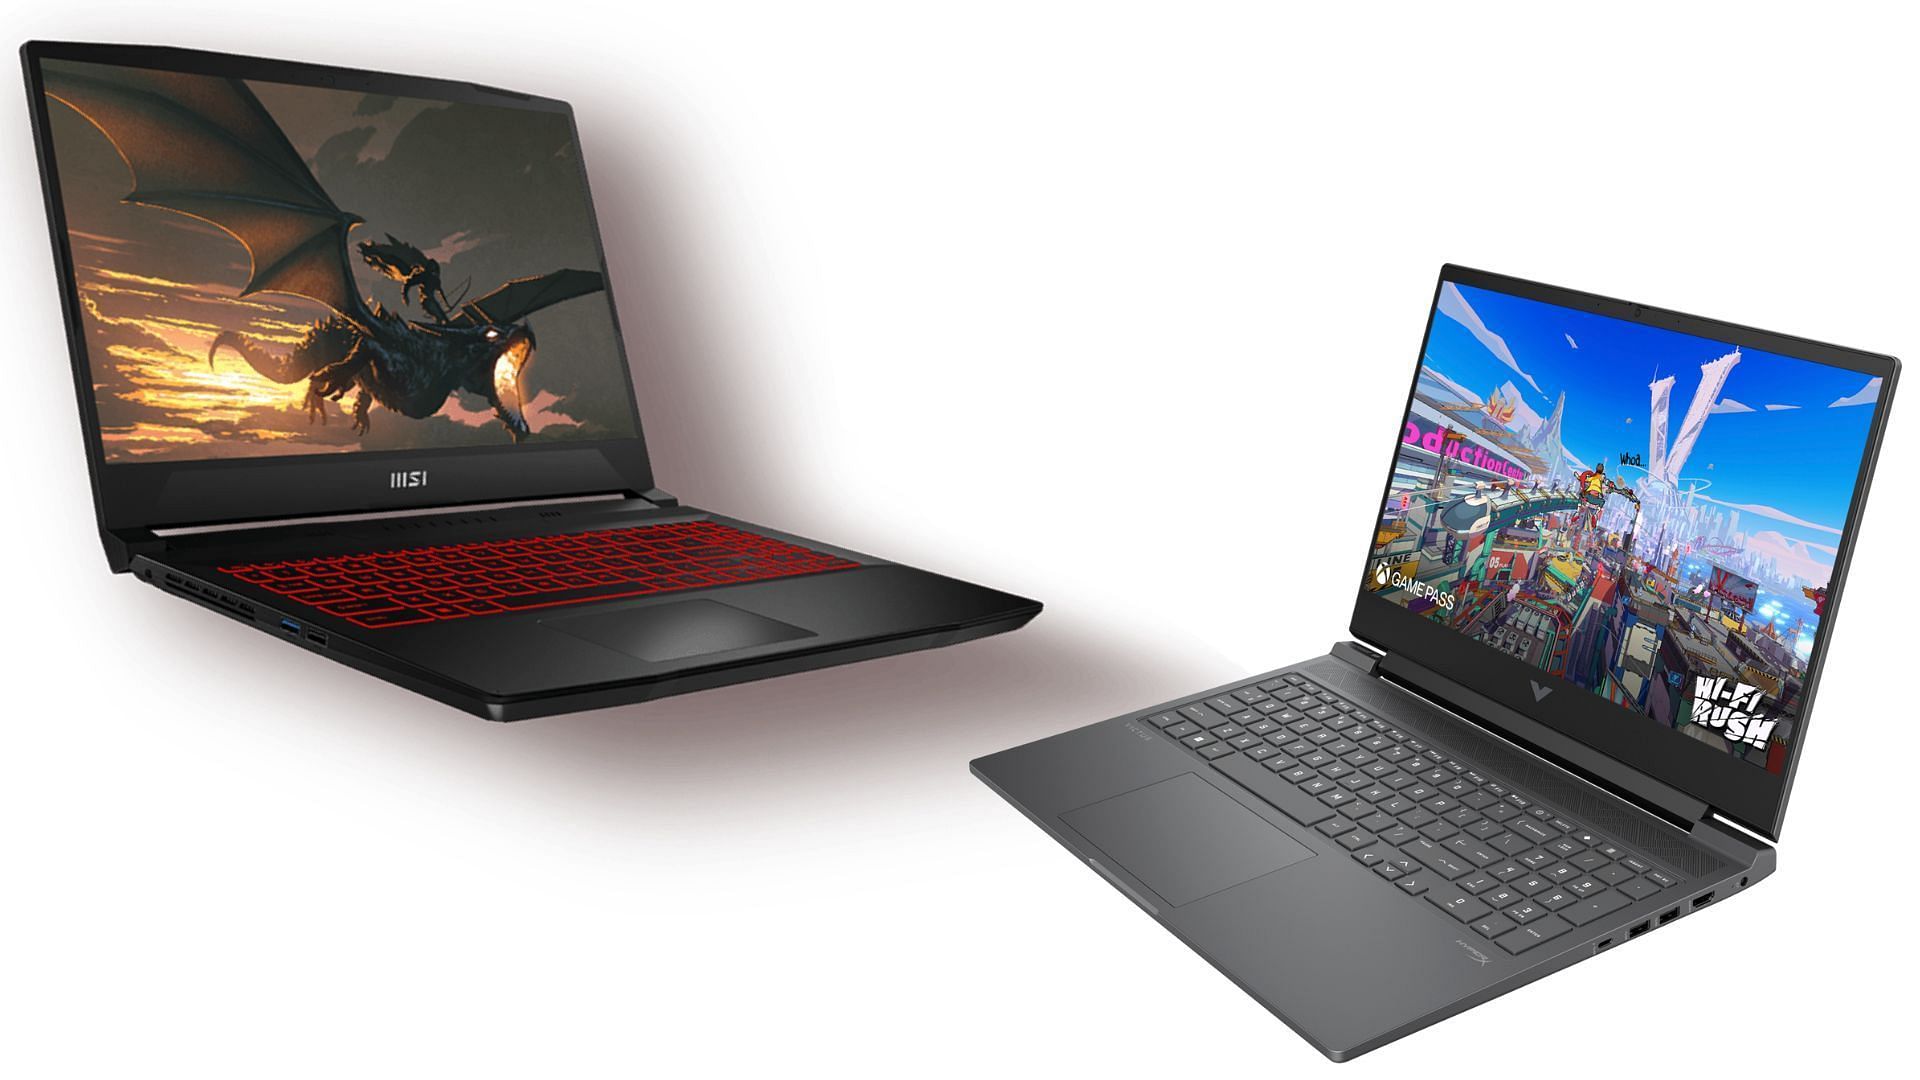 We feel the Victus offers greater value for money (Image via HP, MSI)